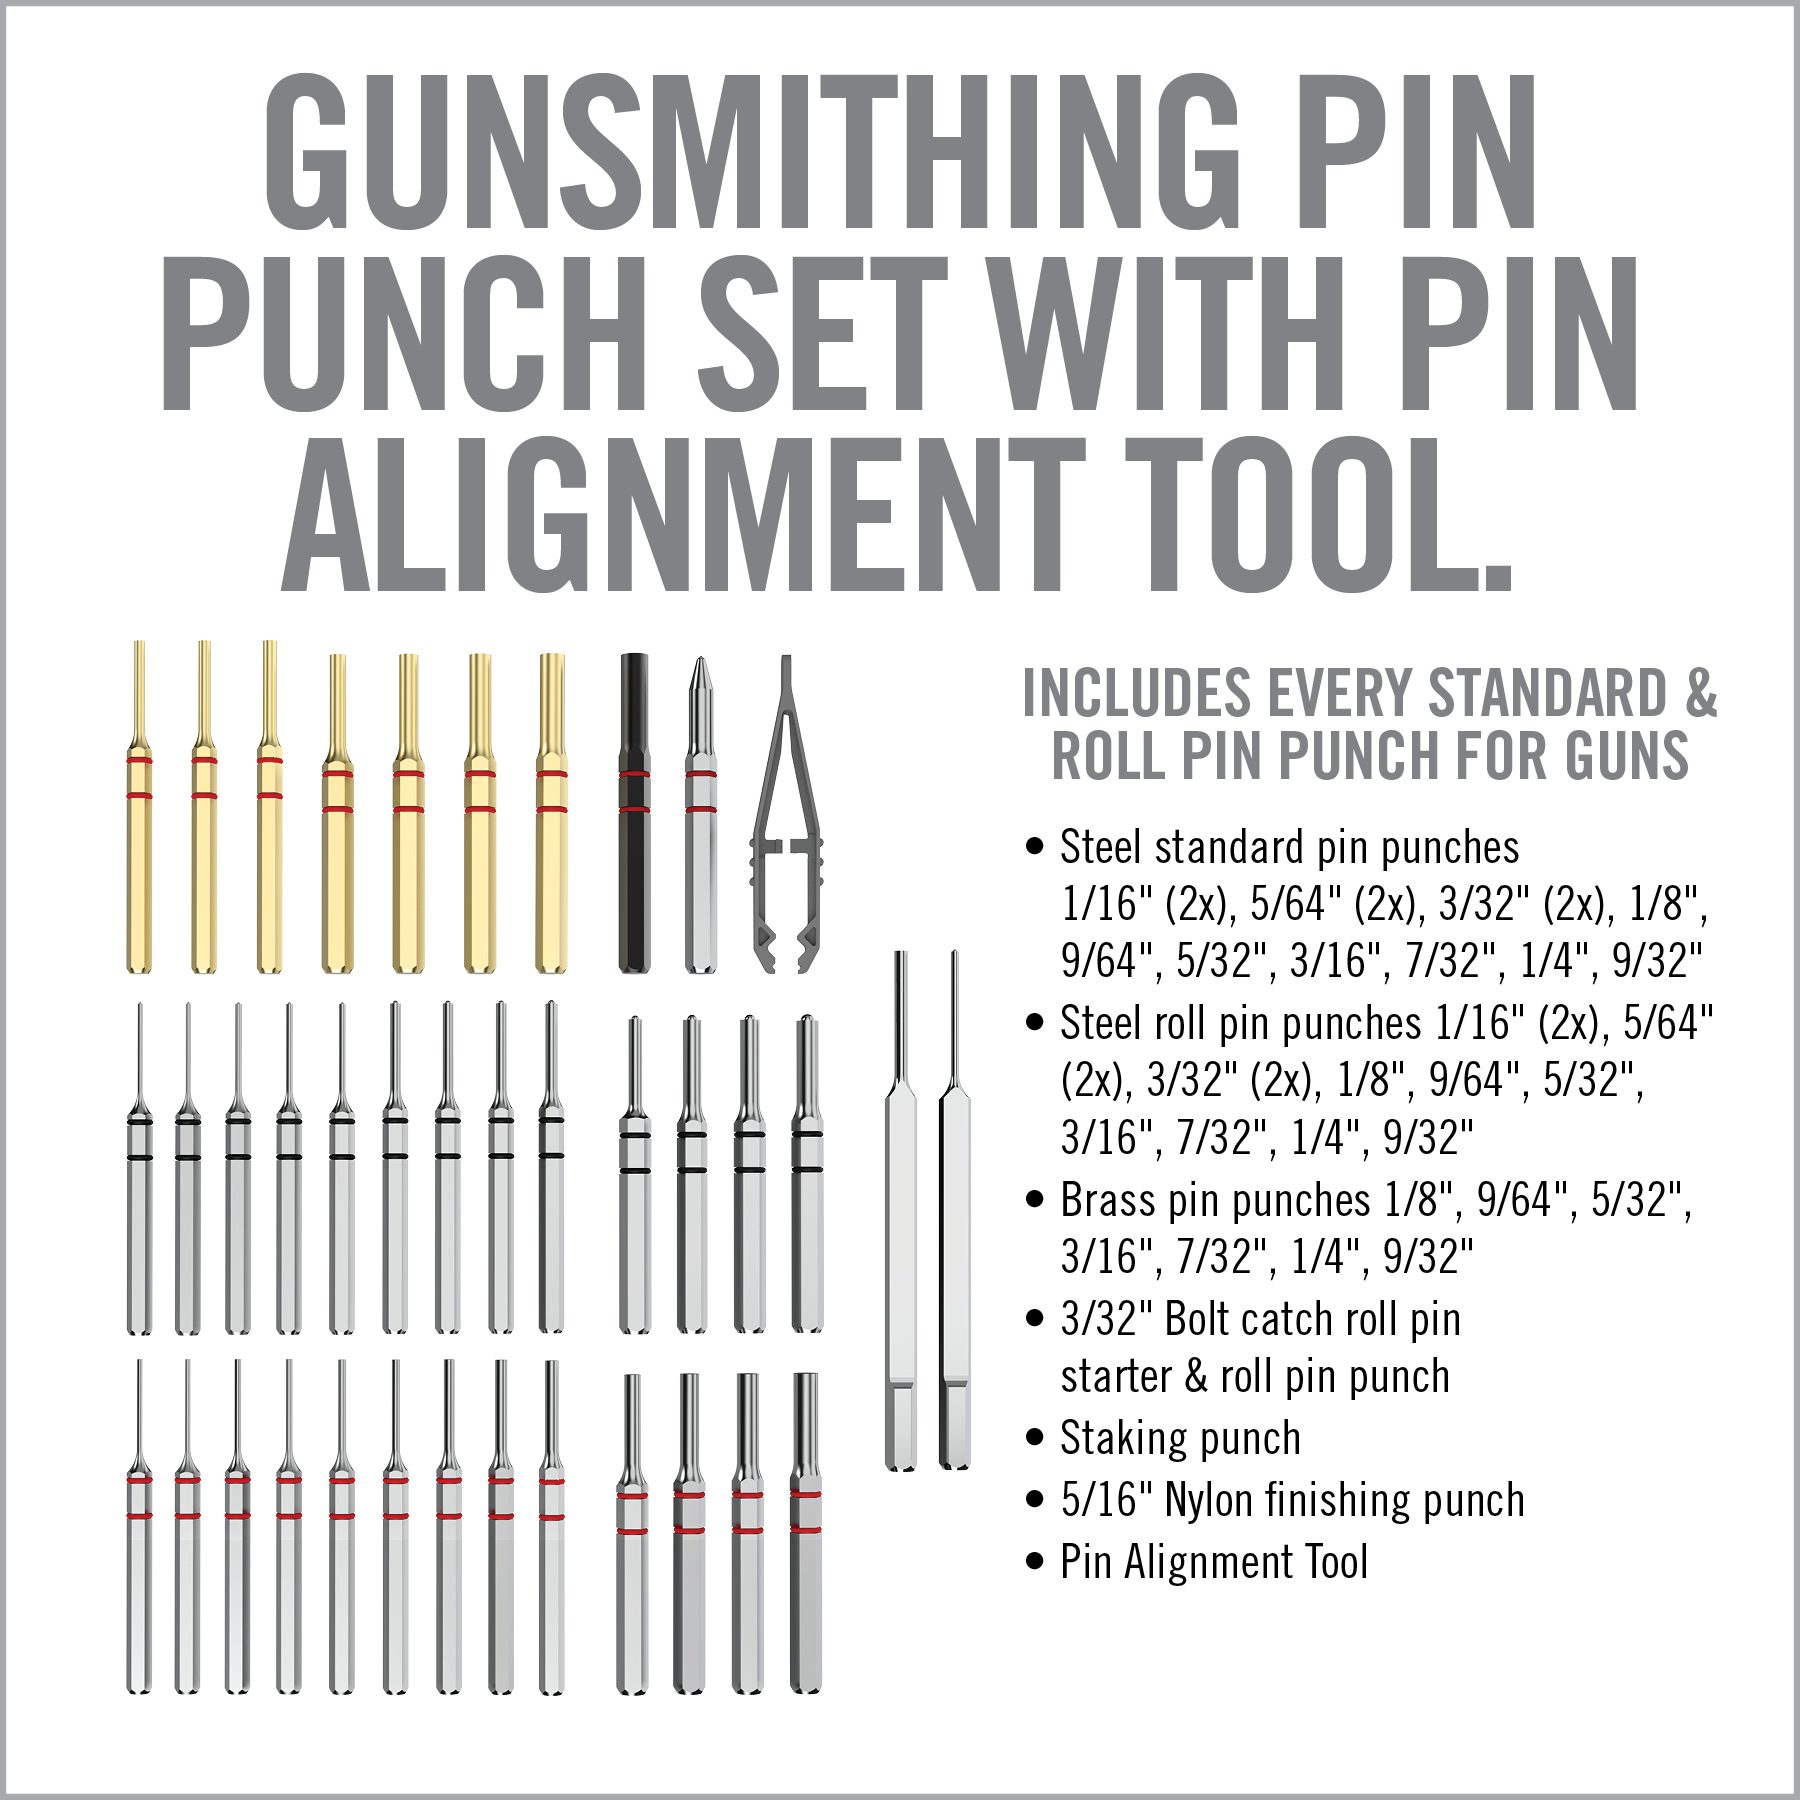 Types of Punches and Their Uses